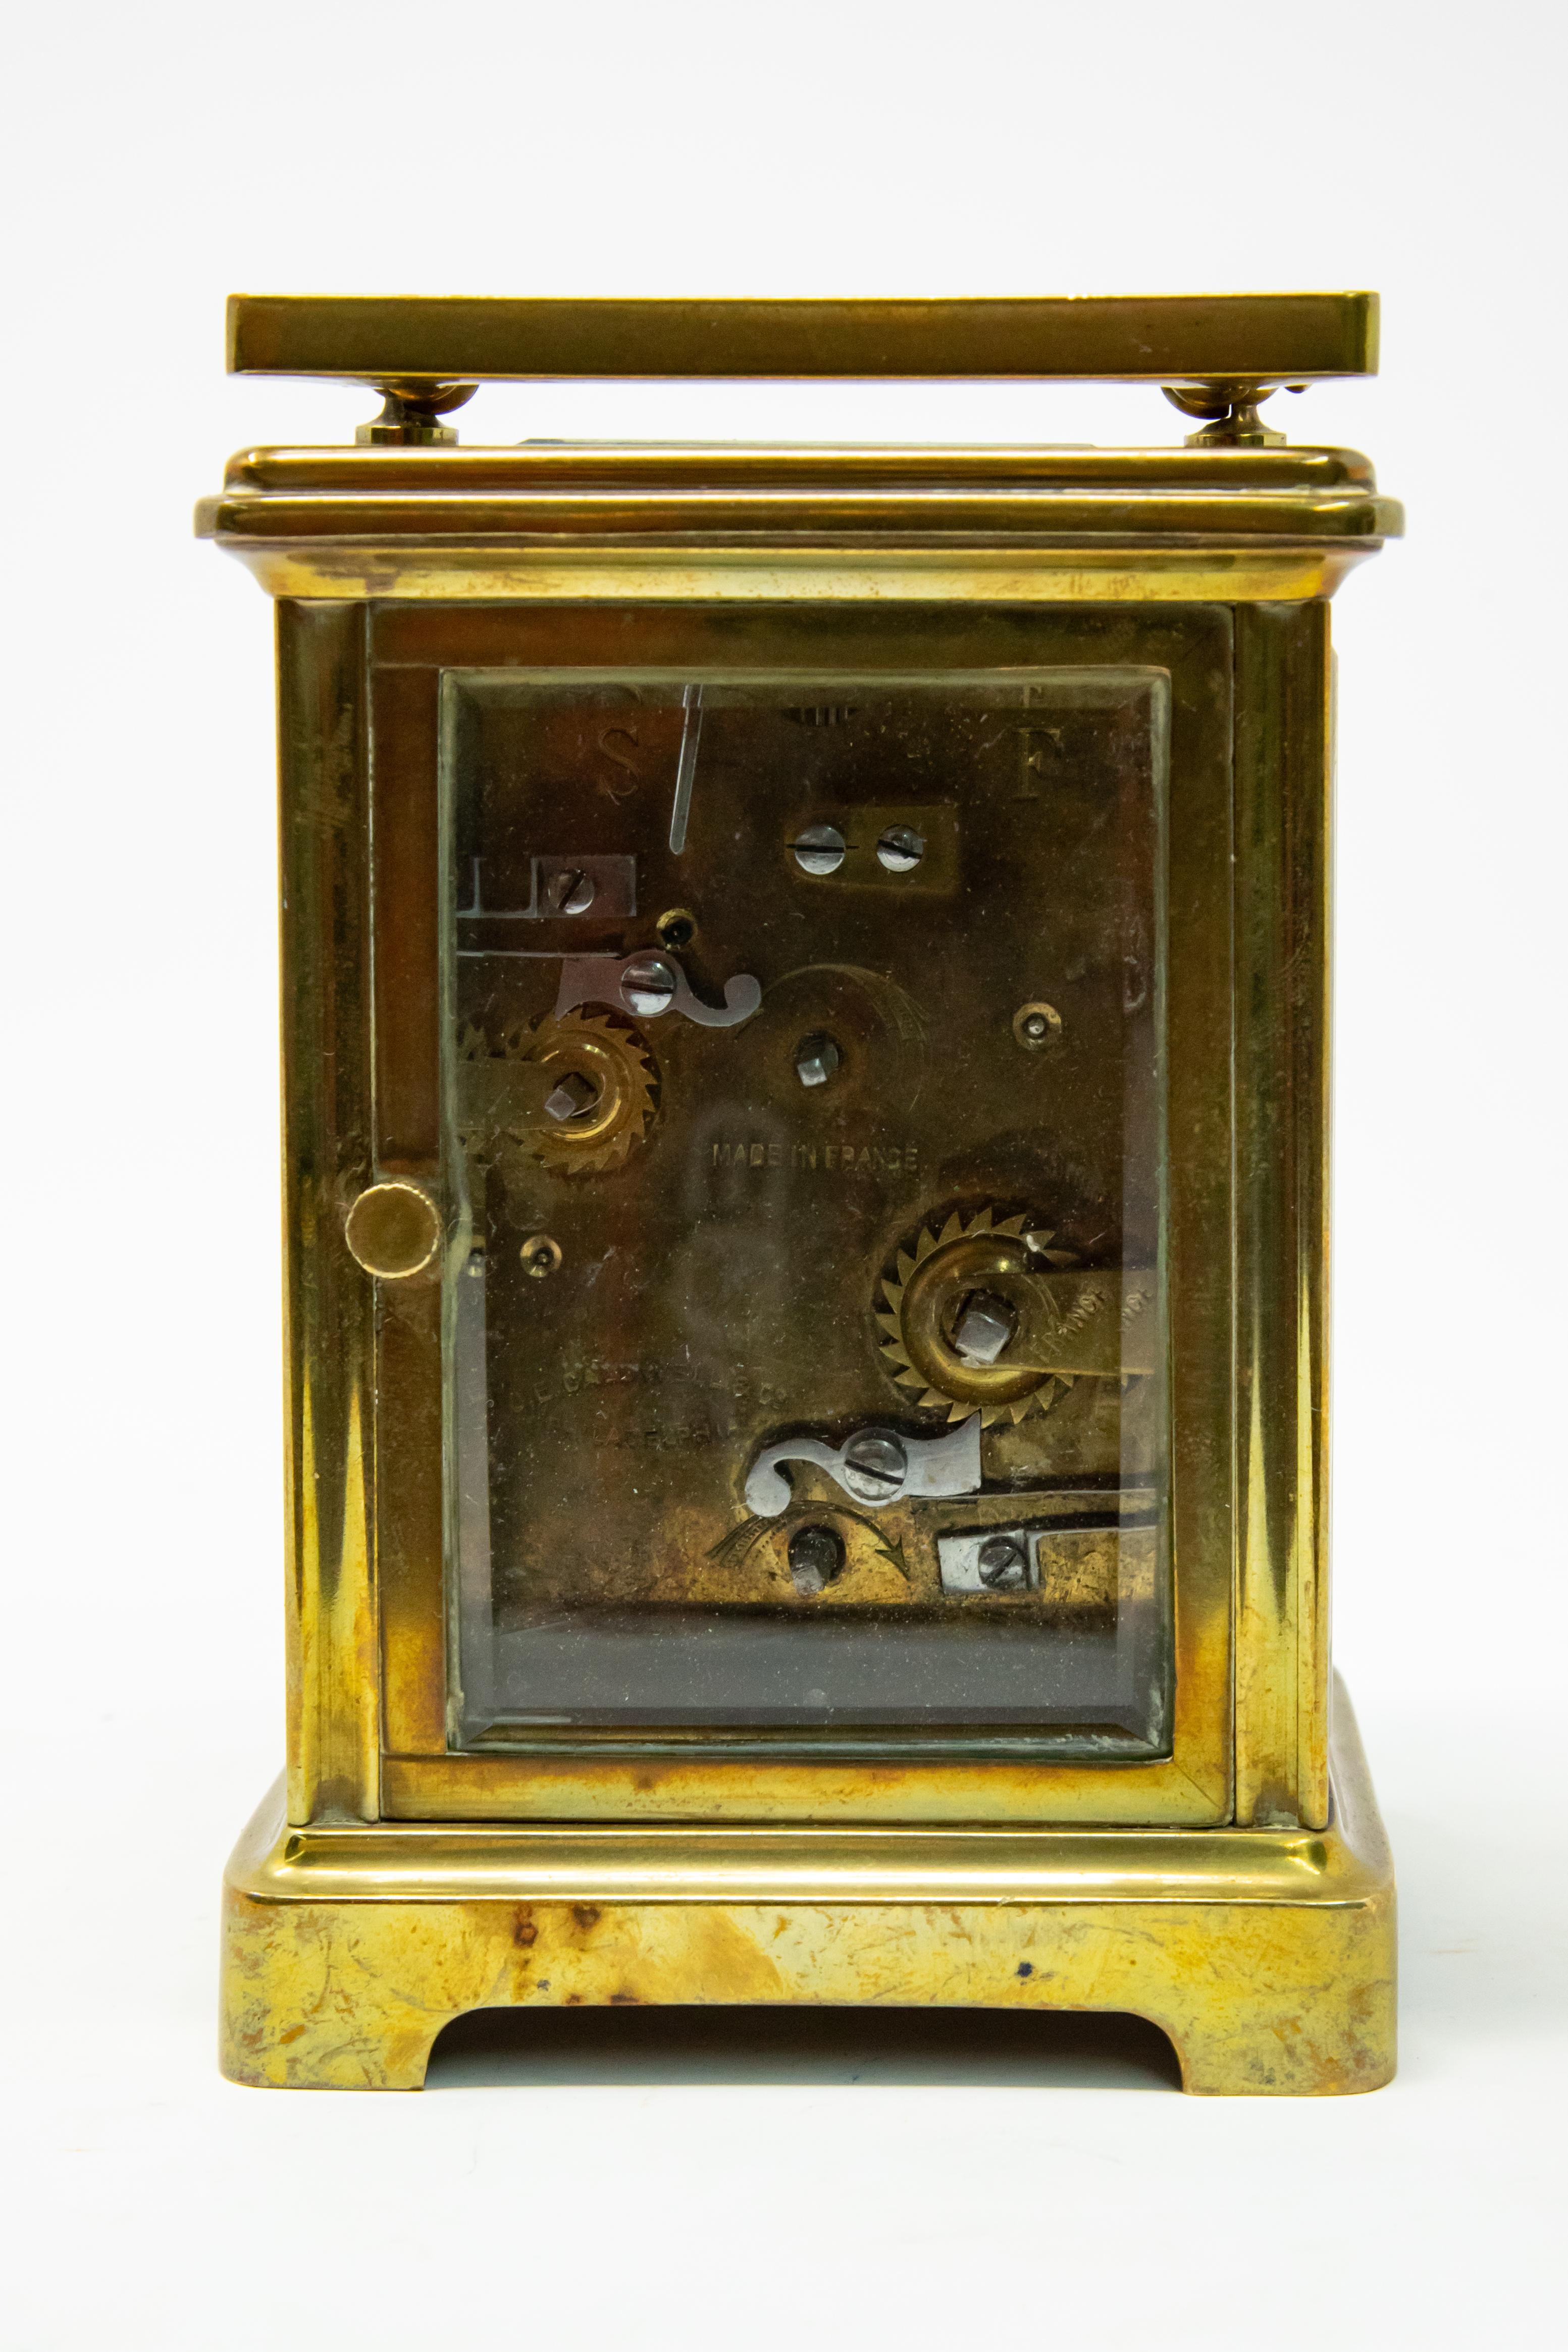 Brass Carriage Clock by J. E.Caldwell & Co. In Fair Condition For Sale In Cookeville, TN